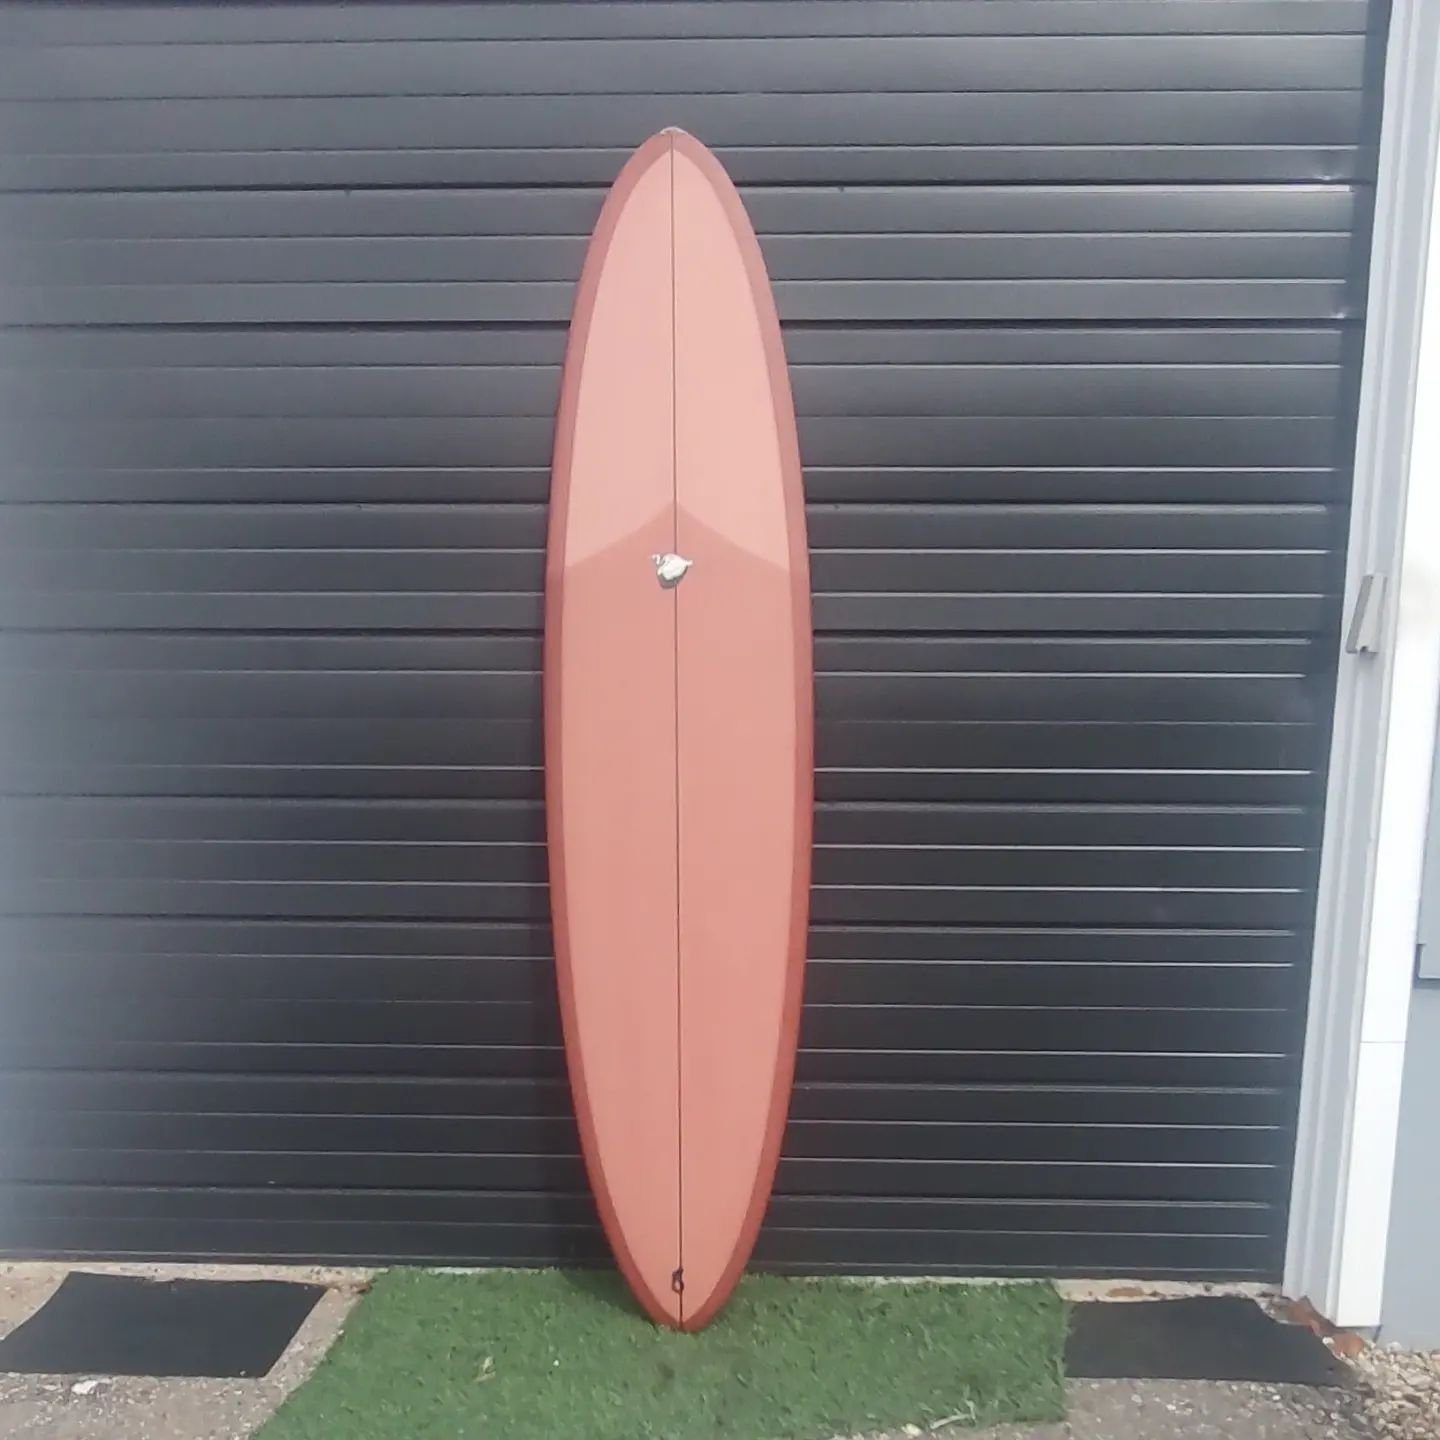 8'0 Weston B Egg 8'0 x 21 7/8 x 2 3/4 
2+1 used in great condition. Small nose ding that's been fixed. $799 with glass fin.